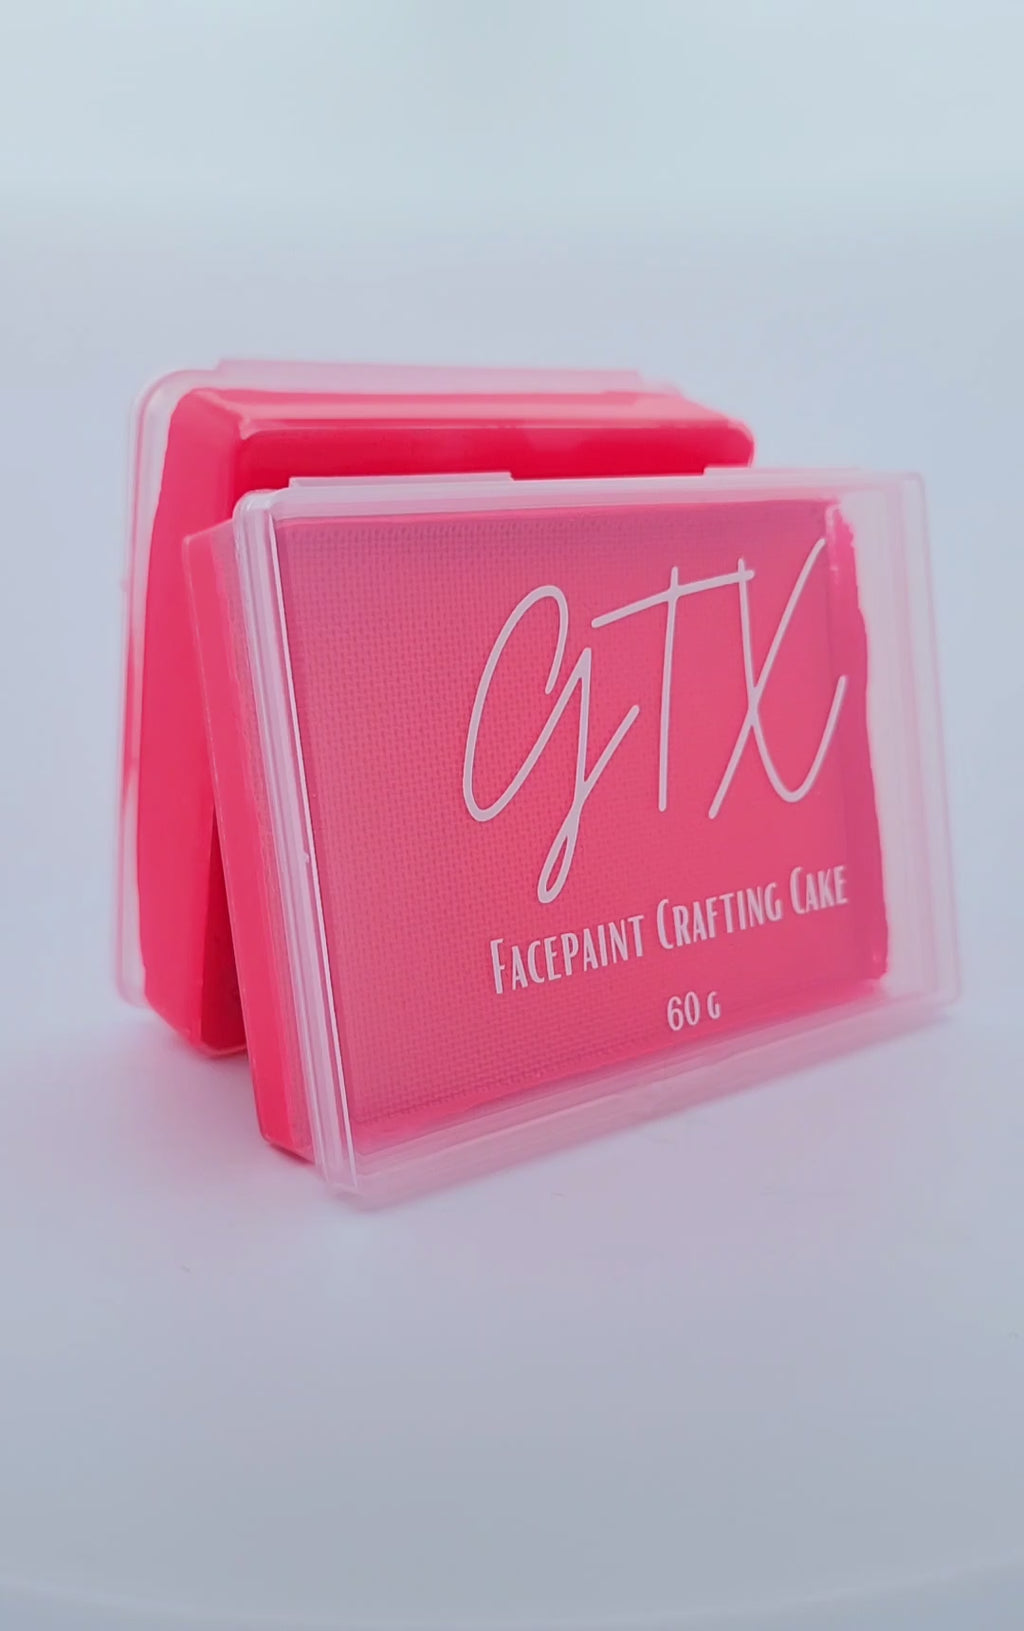 GTX Paint | Crafting Cake - Neon Watermelon Crawl (Coral Pink) - size comparisons